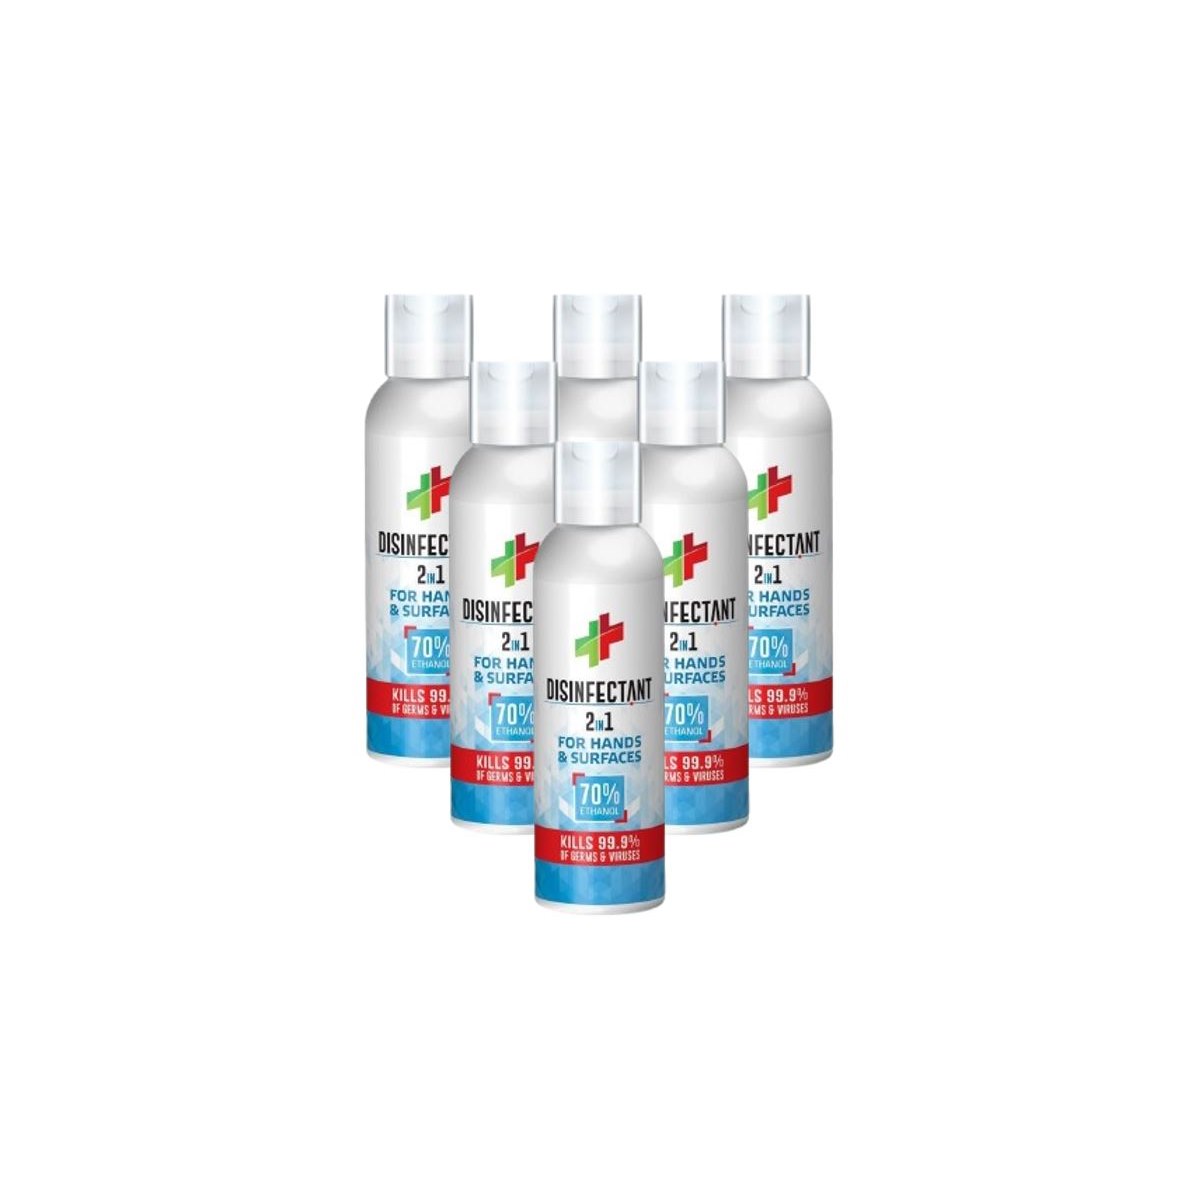 Case of 6 x Tri-Bio 2 in 1 Disinfectant for Hands and Hard Surfaces Travel Size 100ml